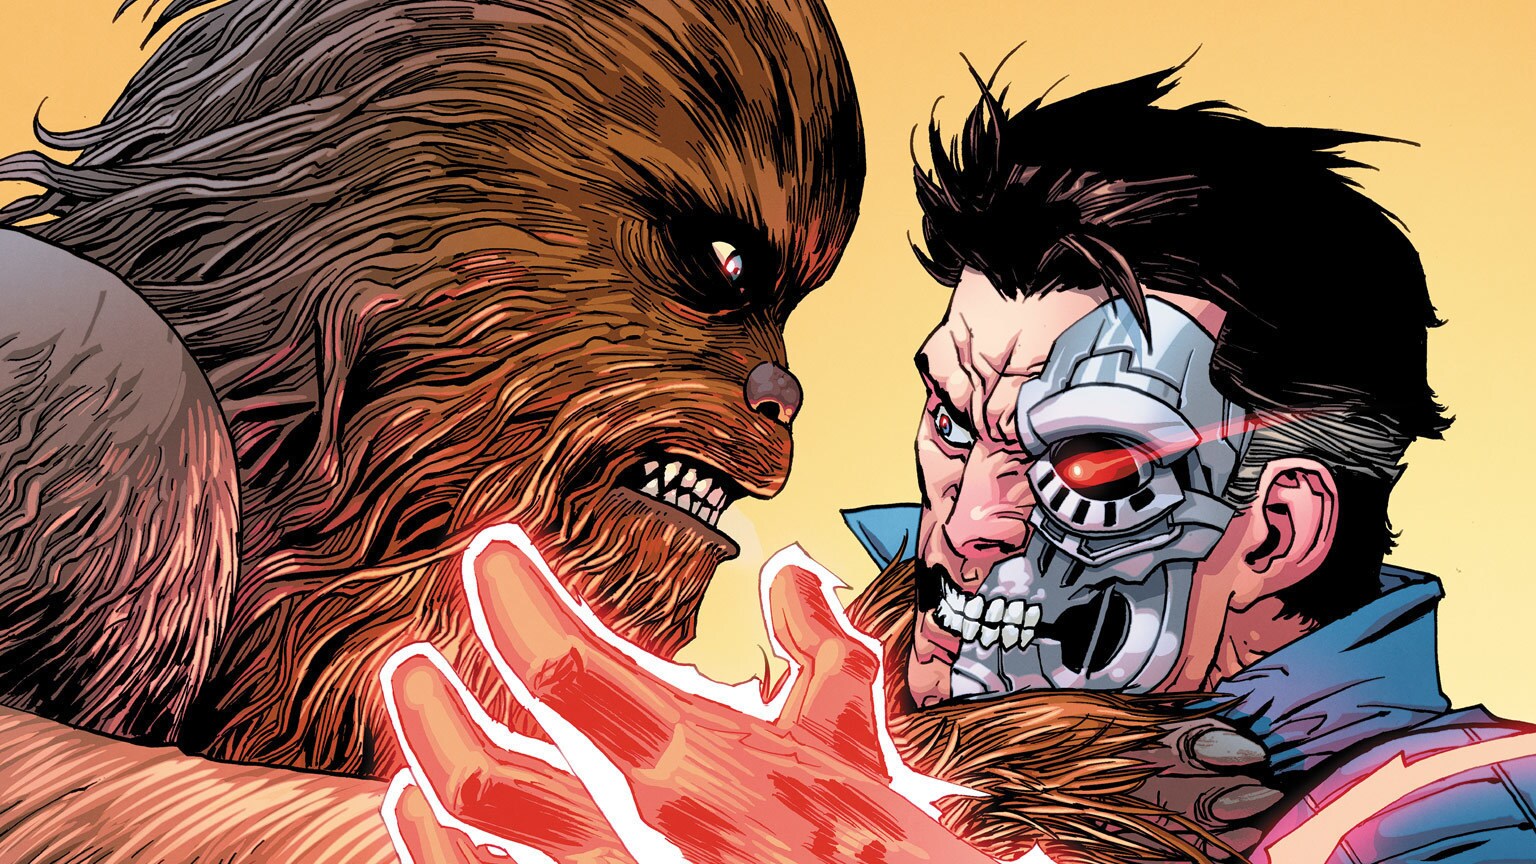 Chewbacca Makes Some Noise in Marvel’s Star Wars: Bounty Hunters #13 - Exclusive Preview